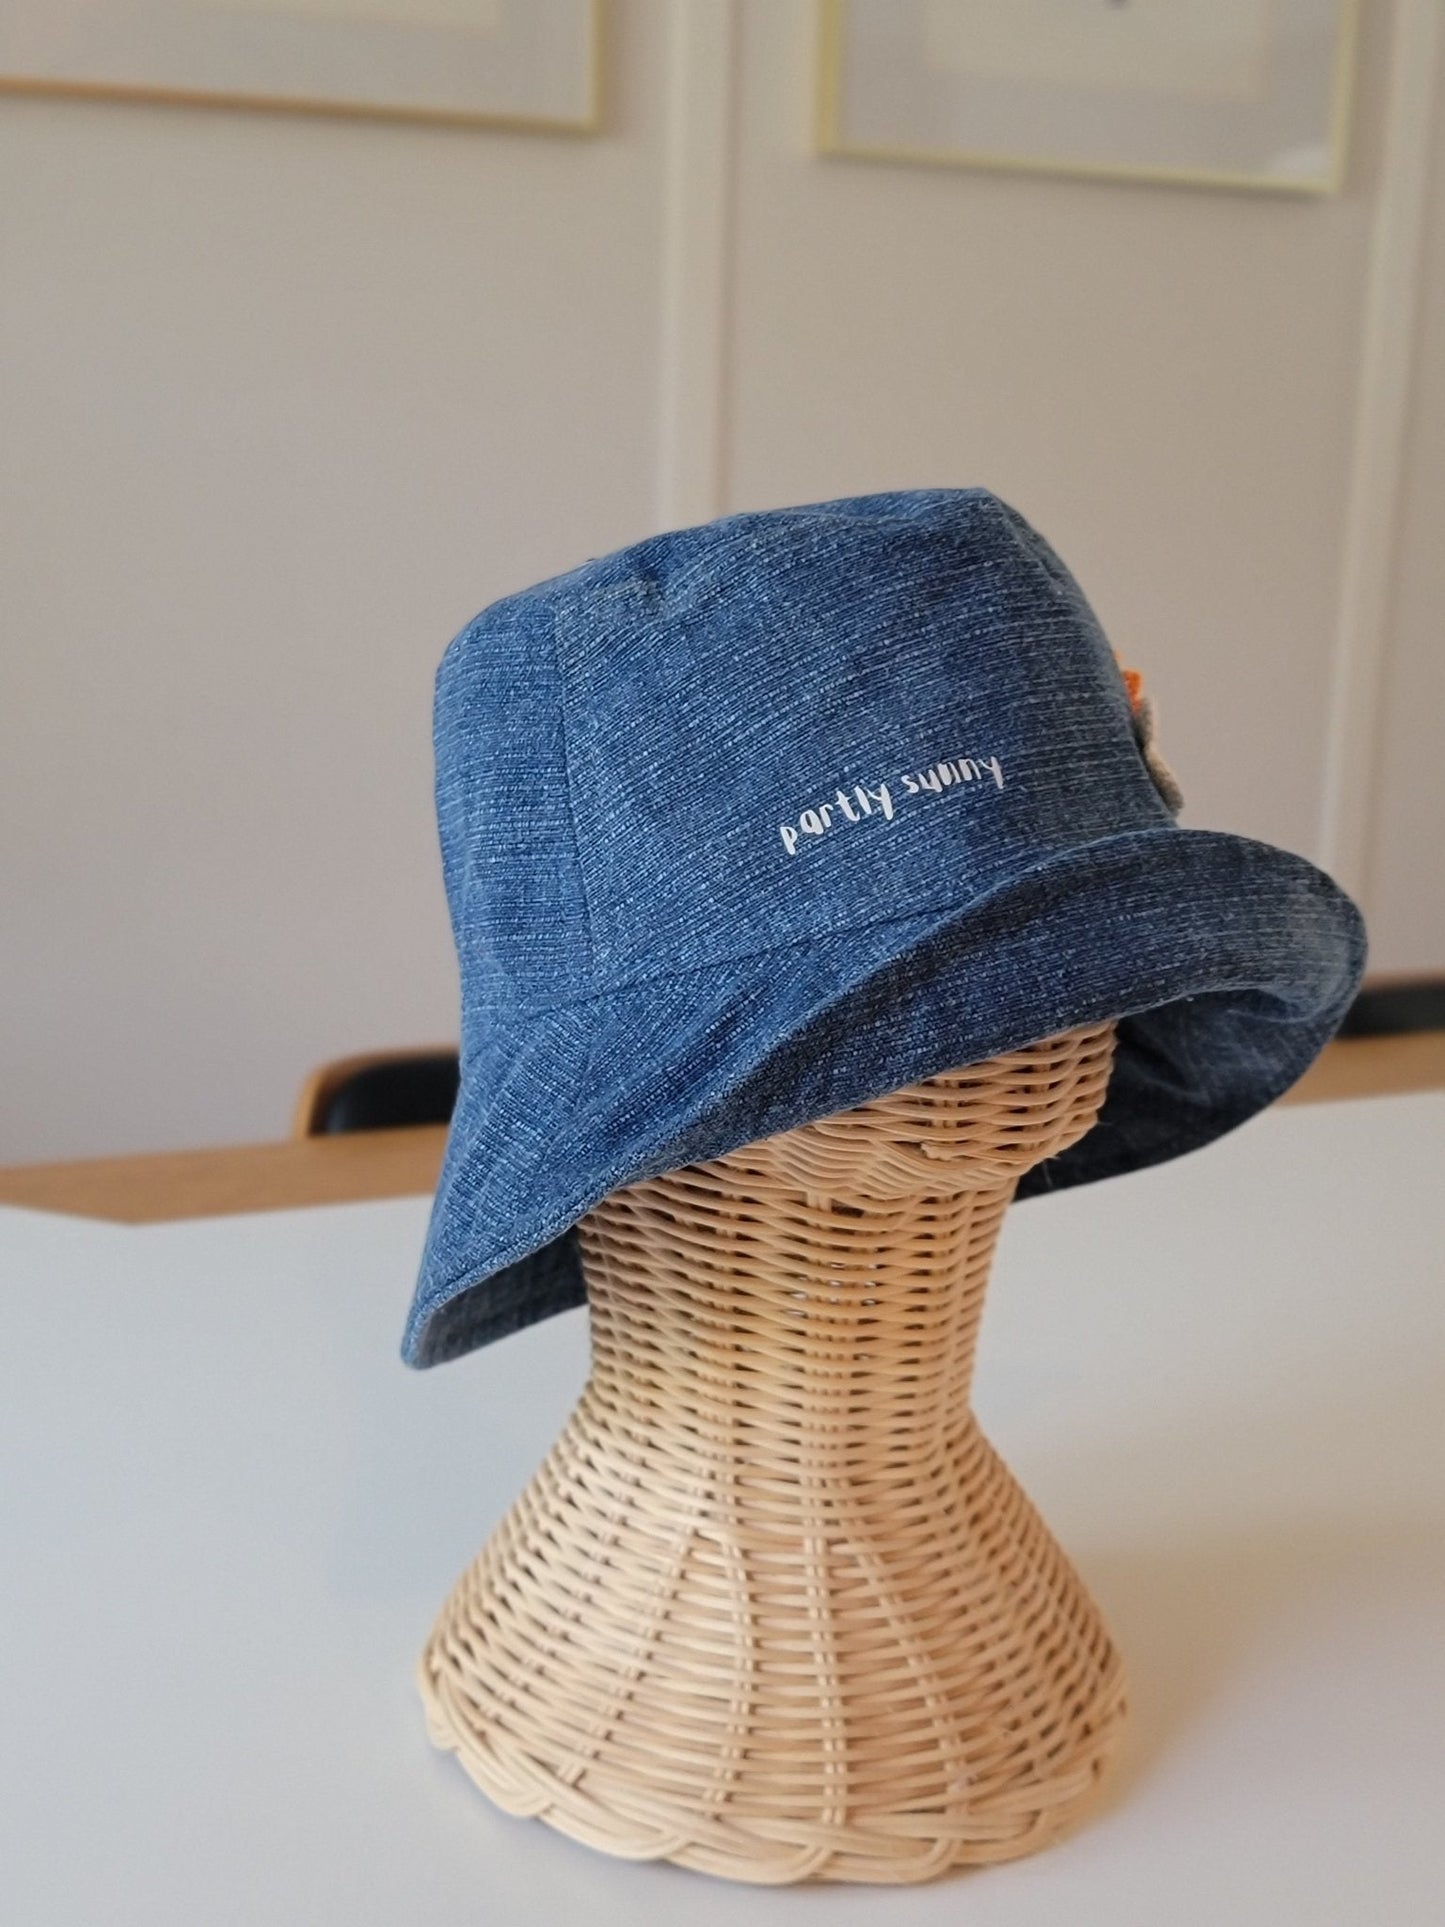 Bucket hat-Partly sunny-5